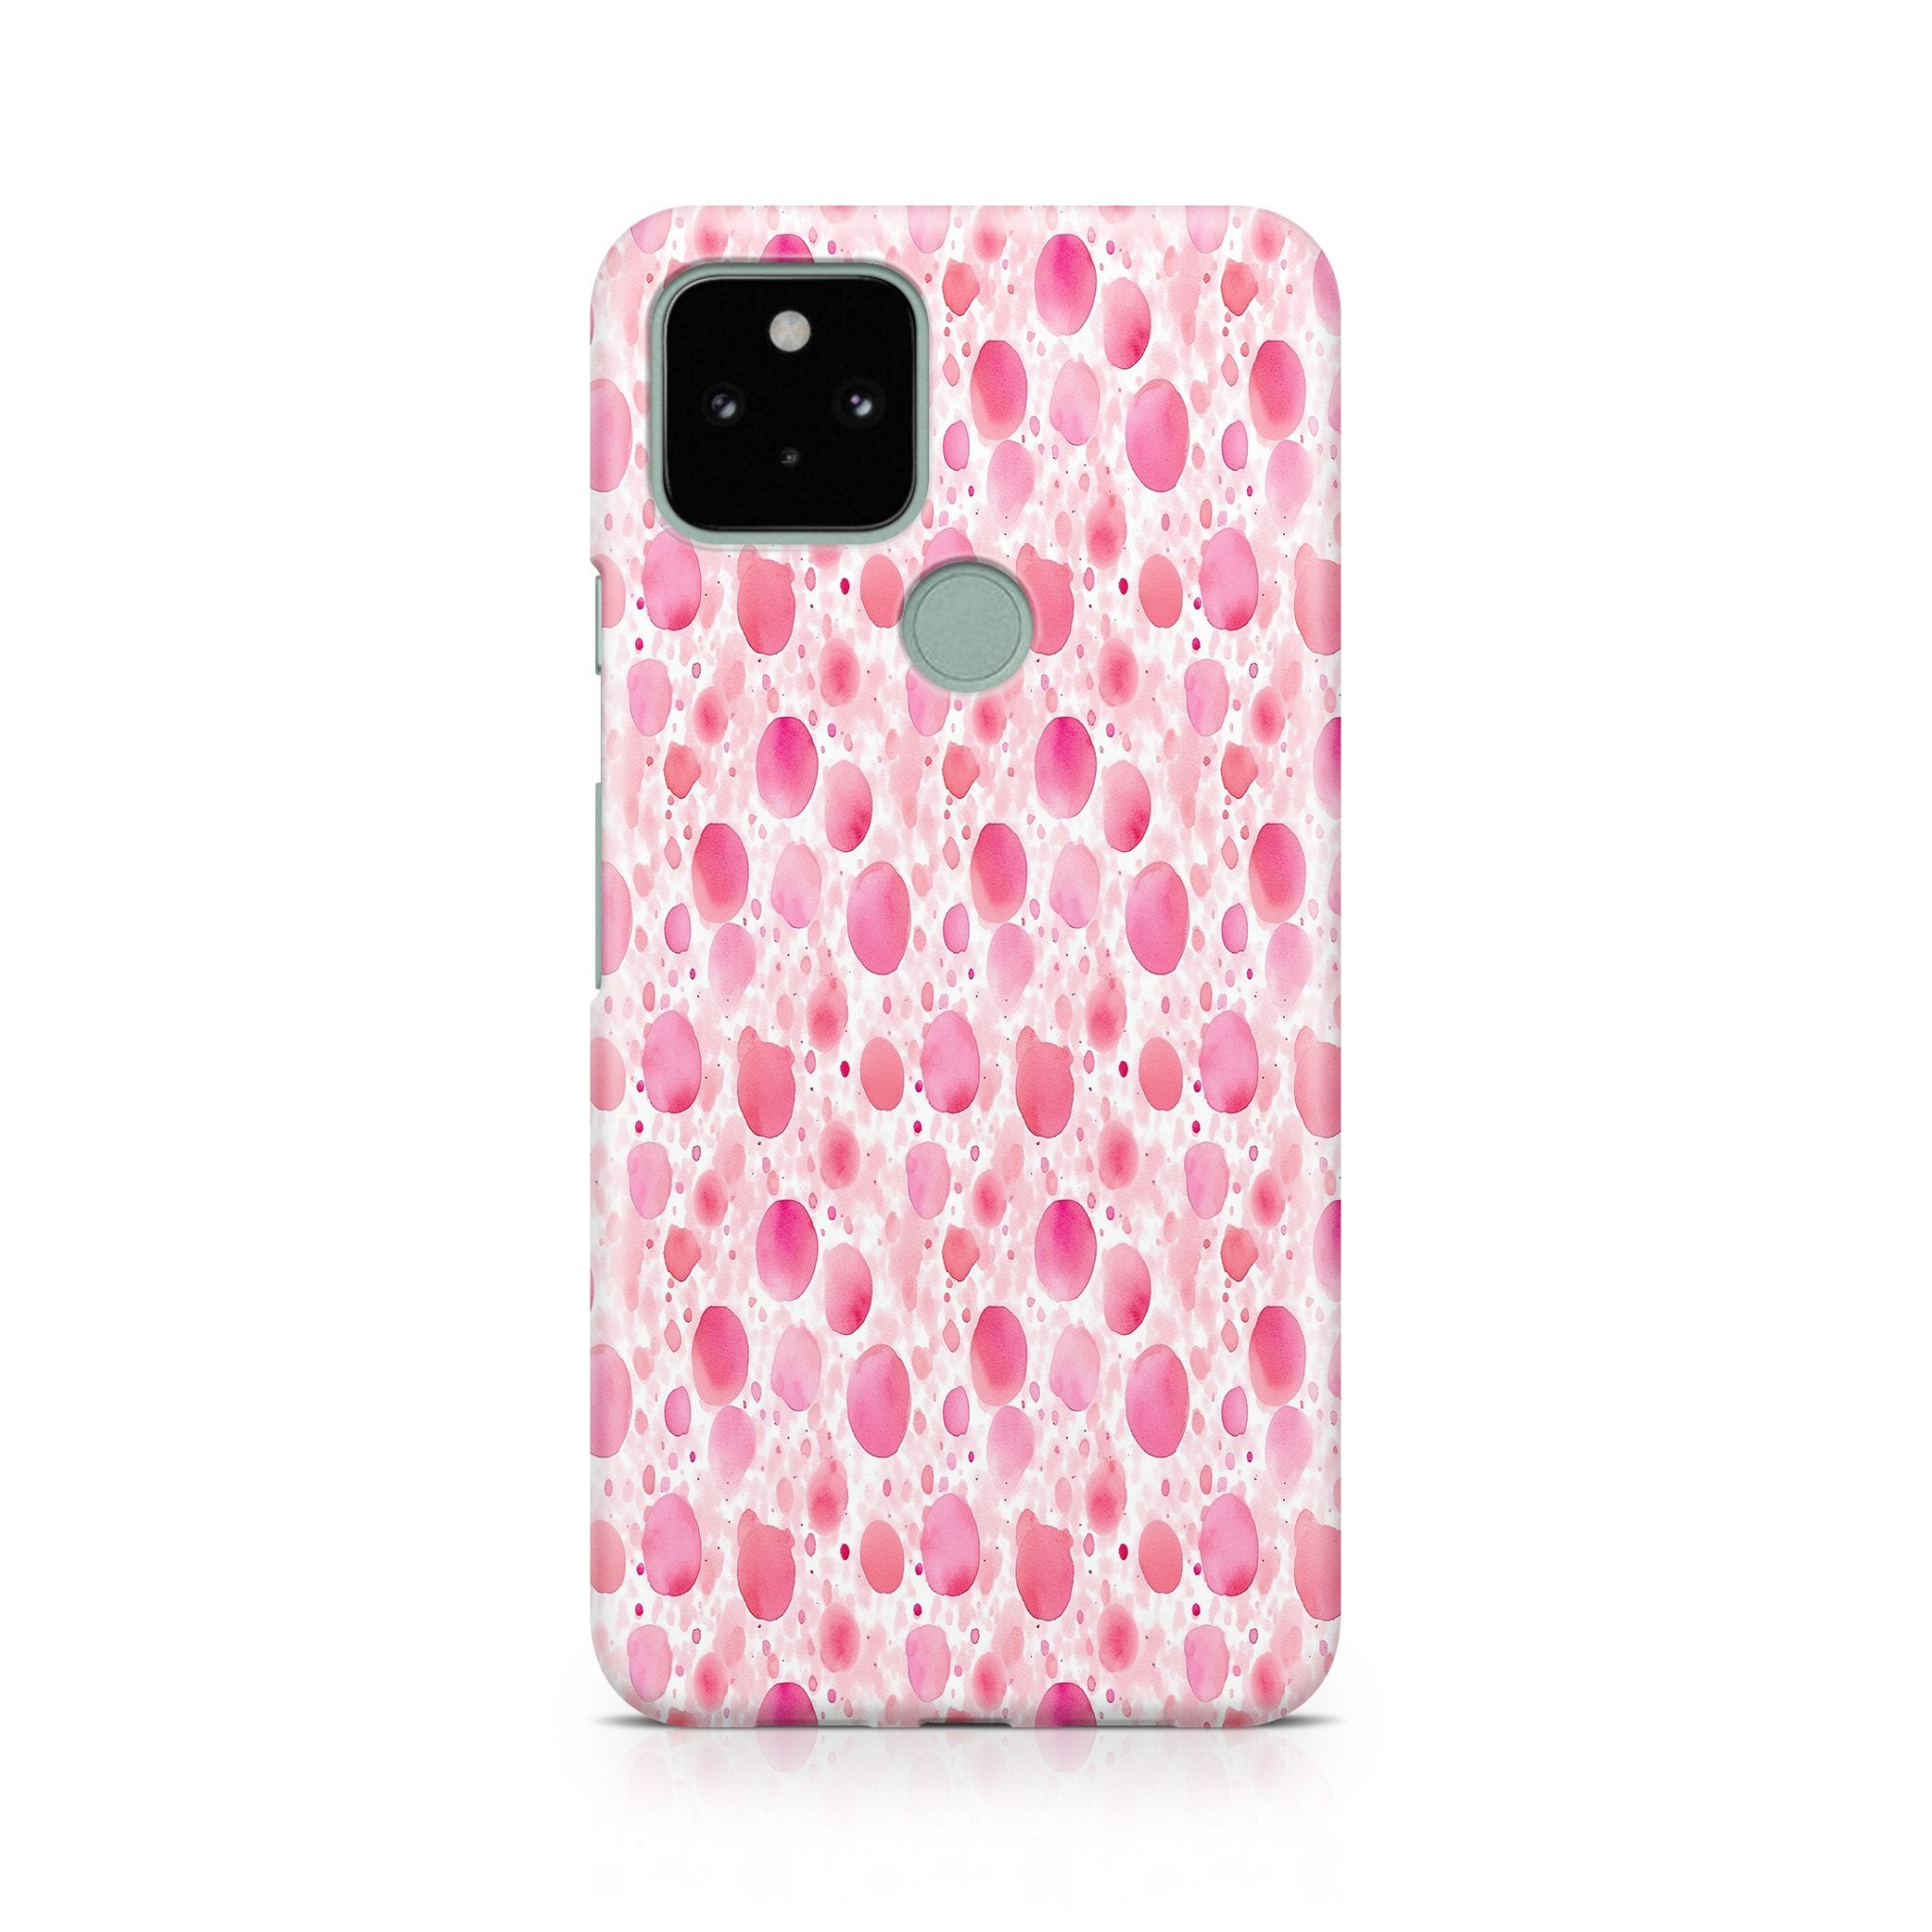 Pink A Dot - Google phone case designs by CaseSwagger